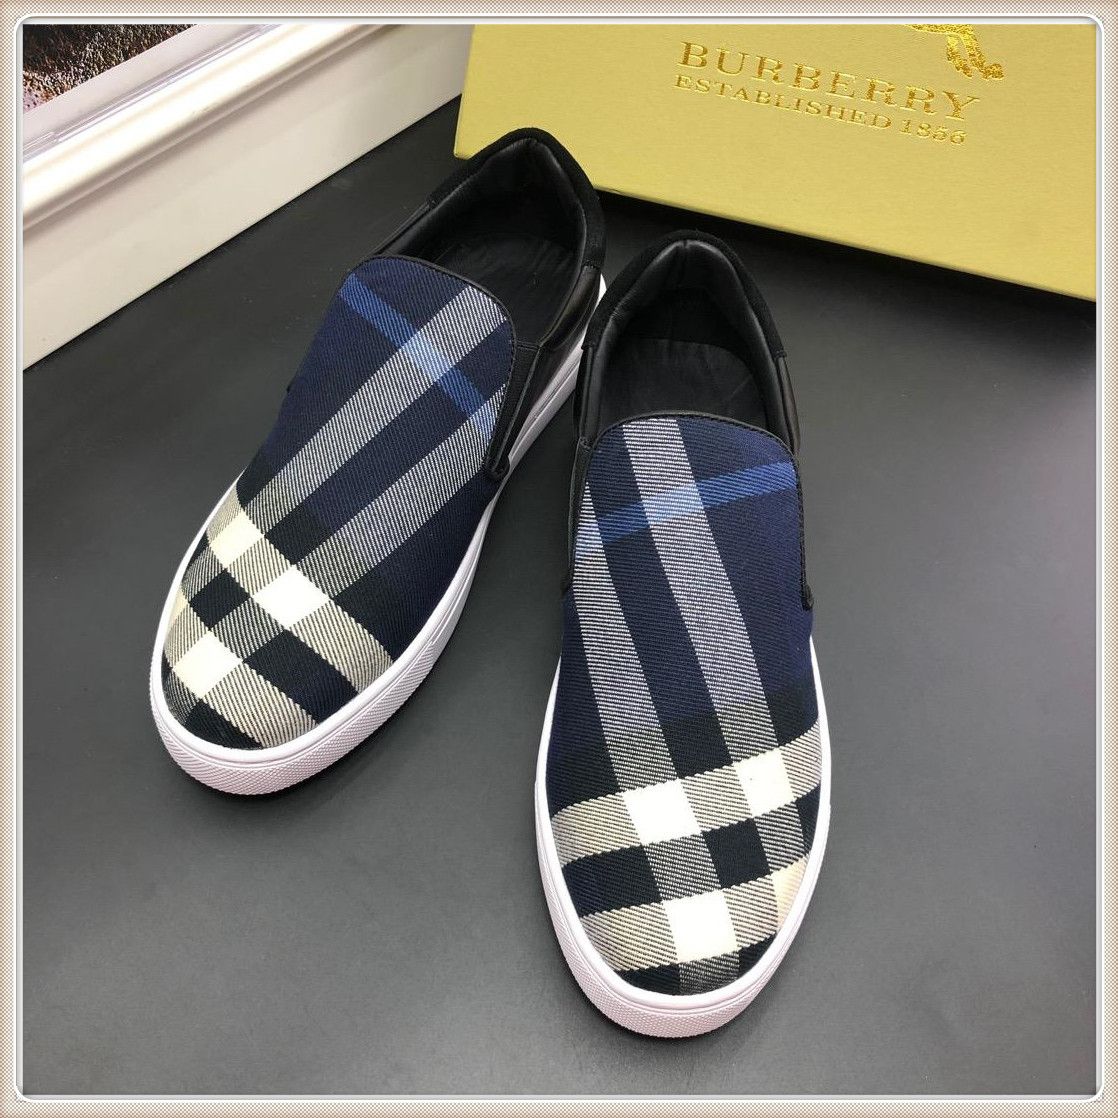 burberry shoes dhgate